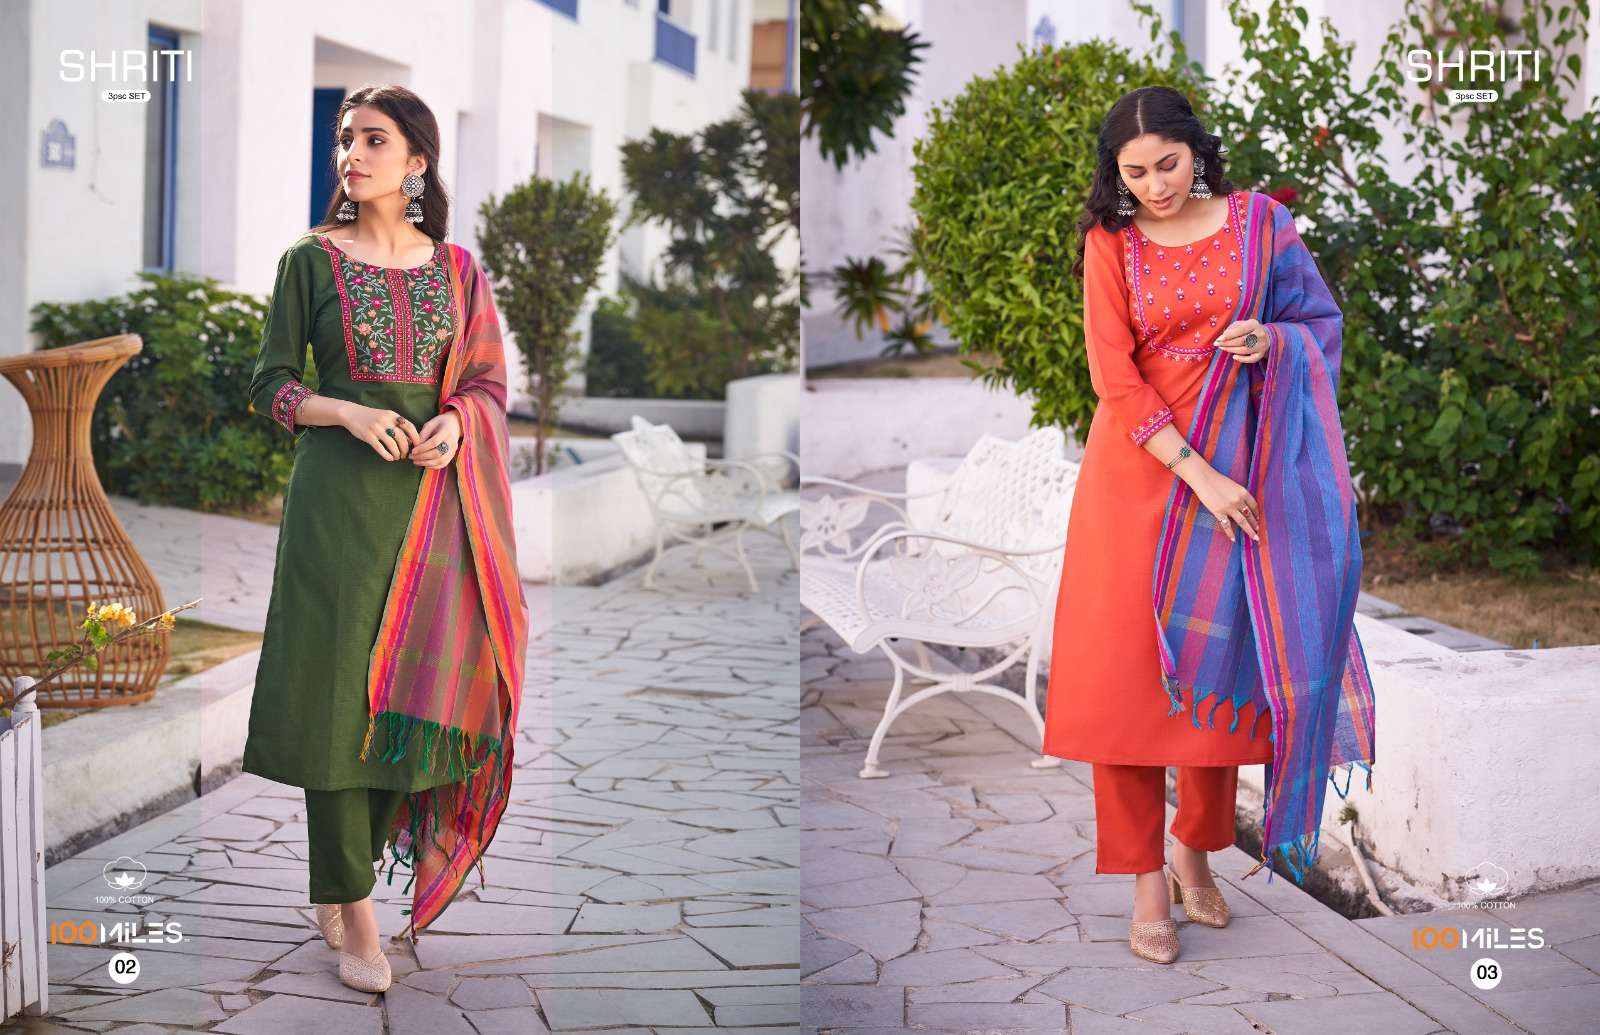 Shriti By 100 Miles 01 To 04 Series Beautiful Festive Suits Stylish Fancy Colorful Casual Wear & Ethnic Wear Pure Cotton Slub Embroidery Dresses At Wholesale Price